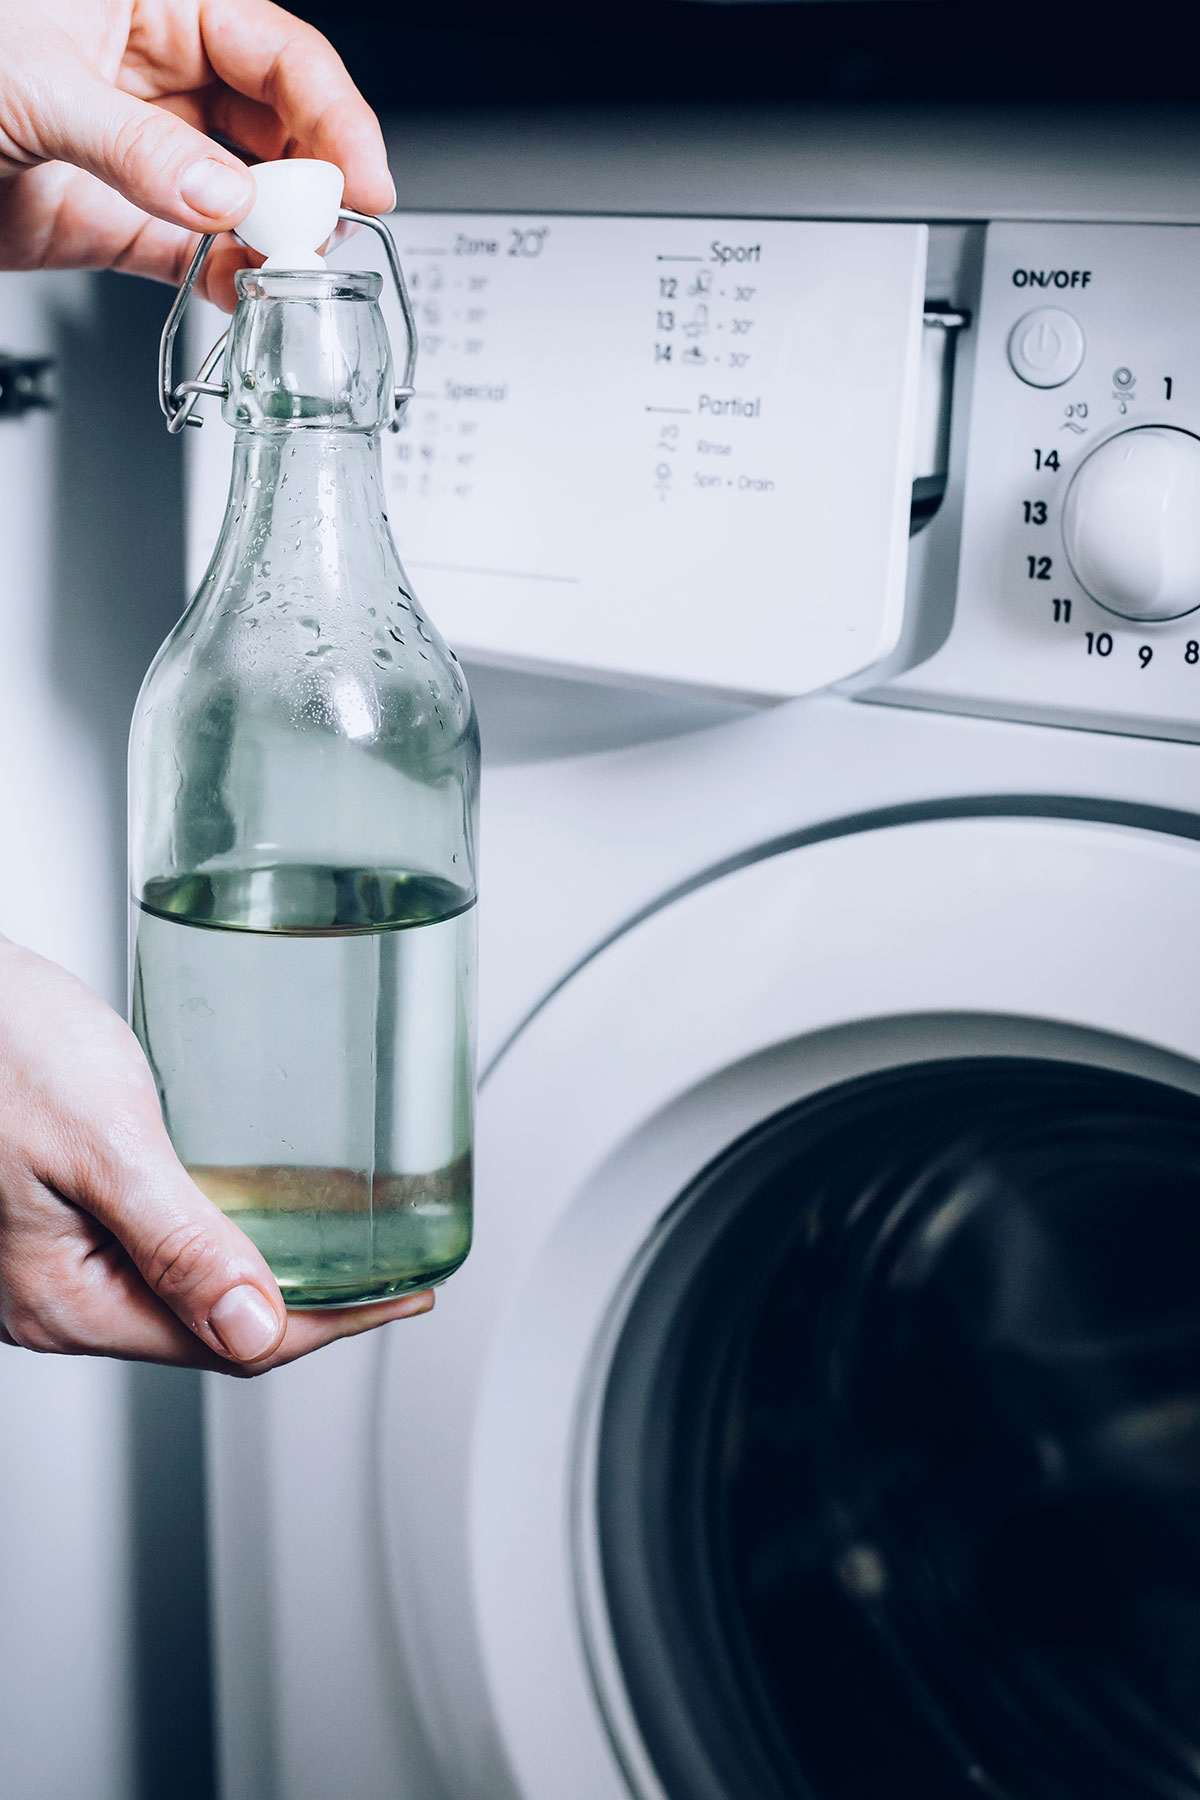 why should you put vinegar in your laundry